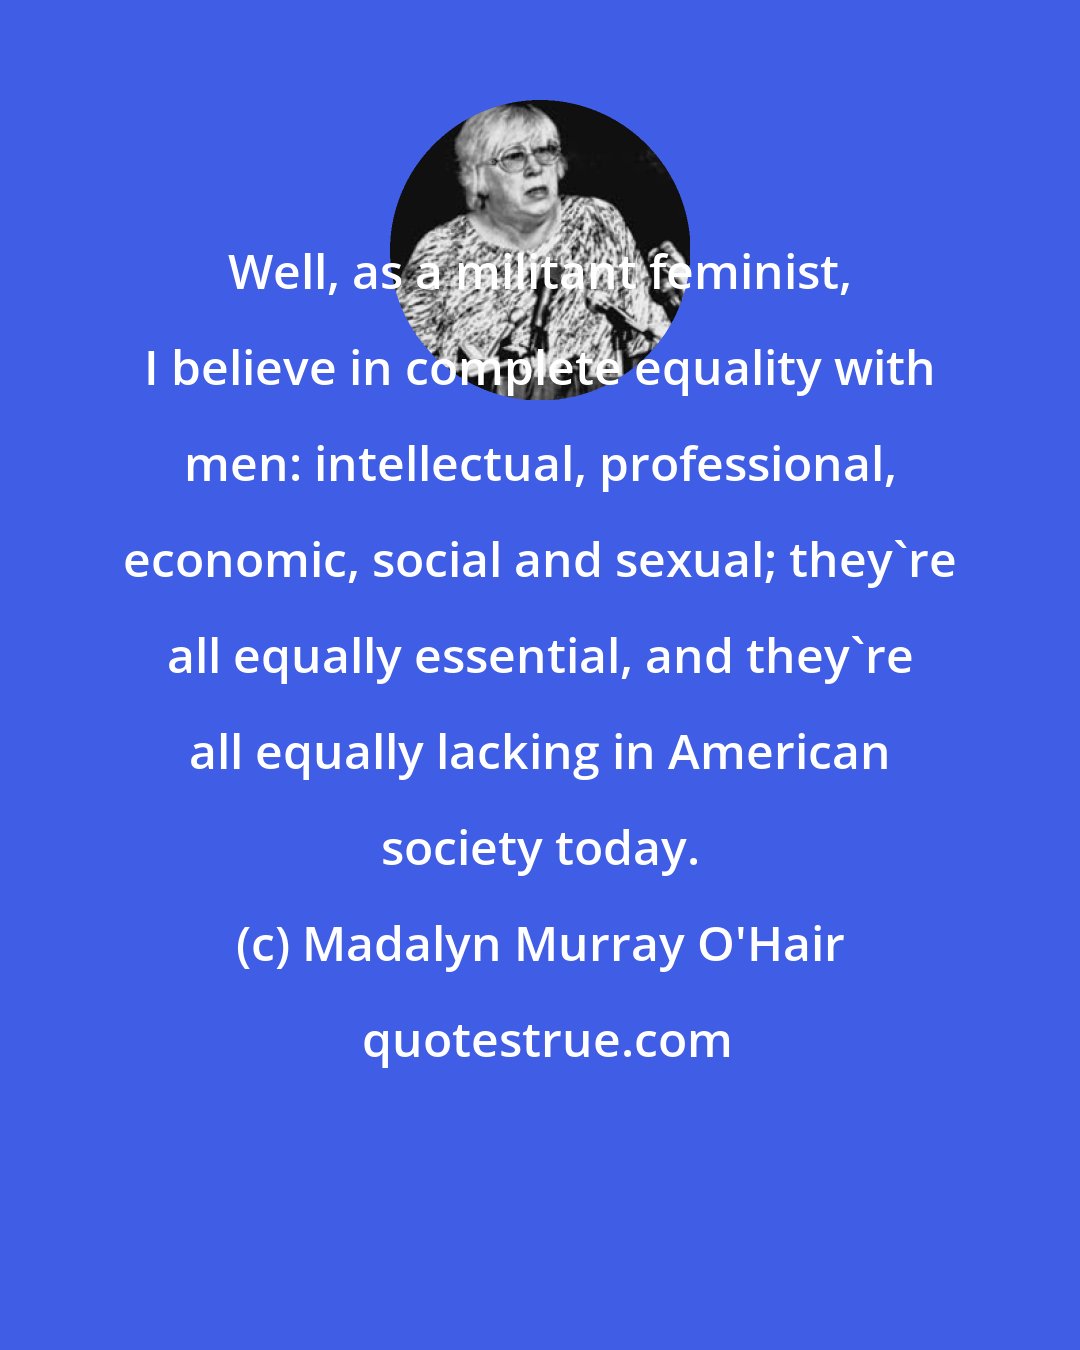 Madalyn Murray O'Hair: Well, as a militant feminist, I believe in complete equality with men: intellectual, professional, economic, social and sexual; they're all equally essential, and they're all equally lacking in American society today.